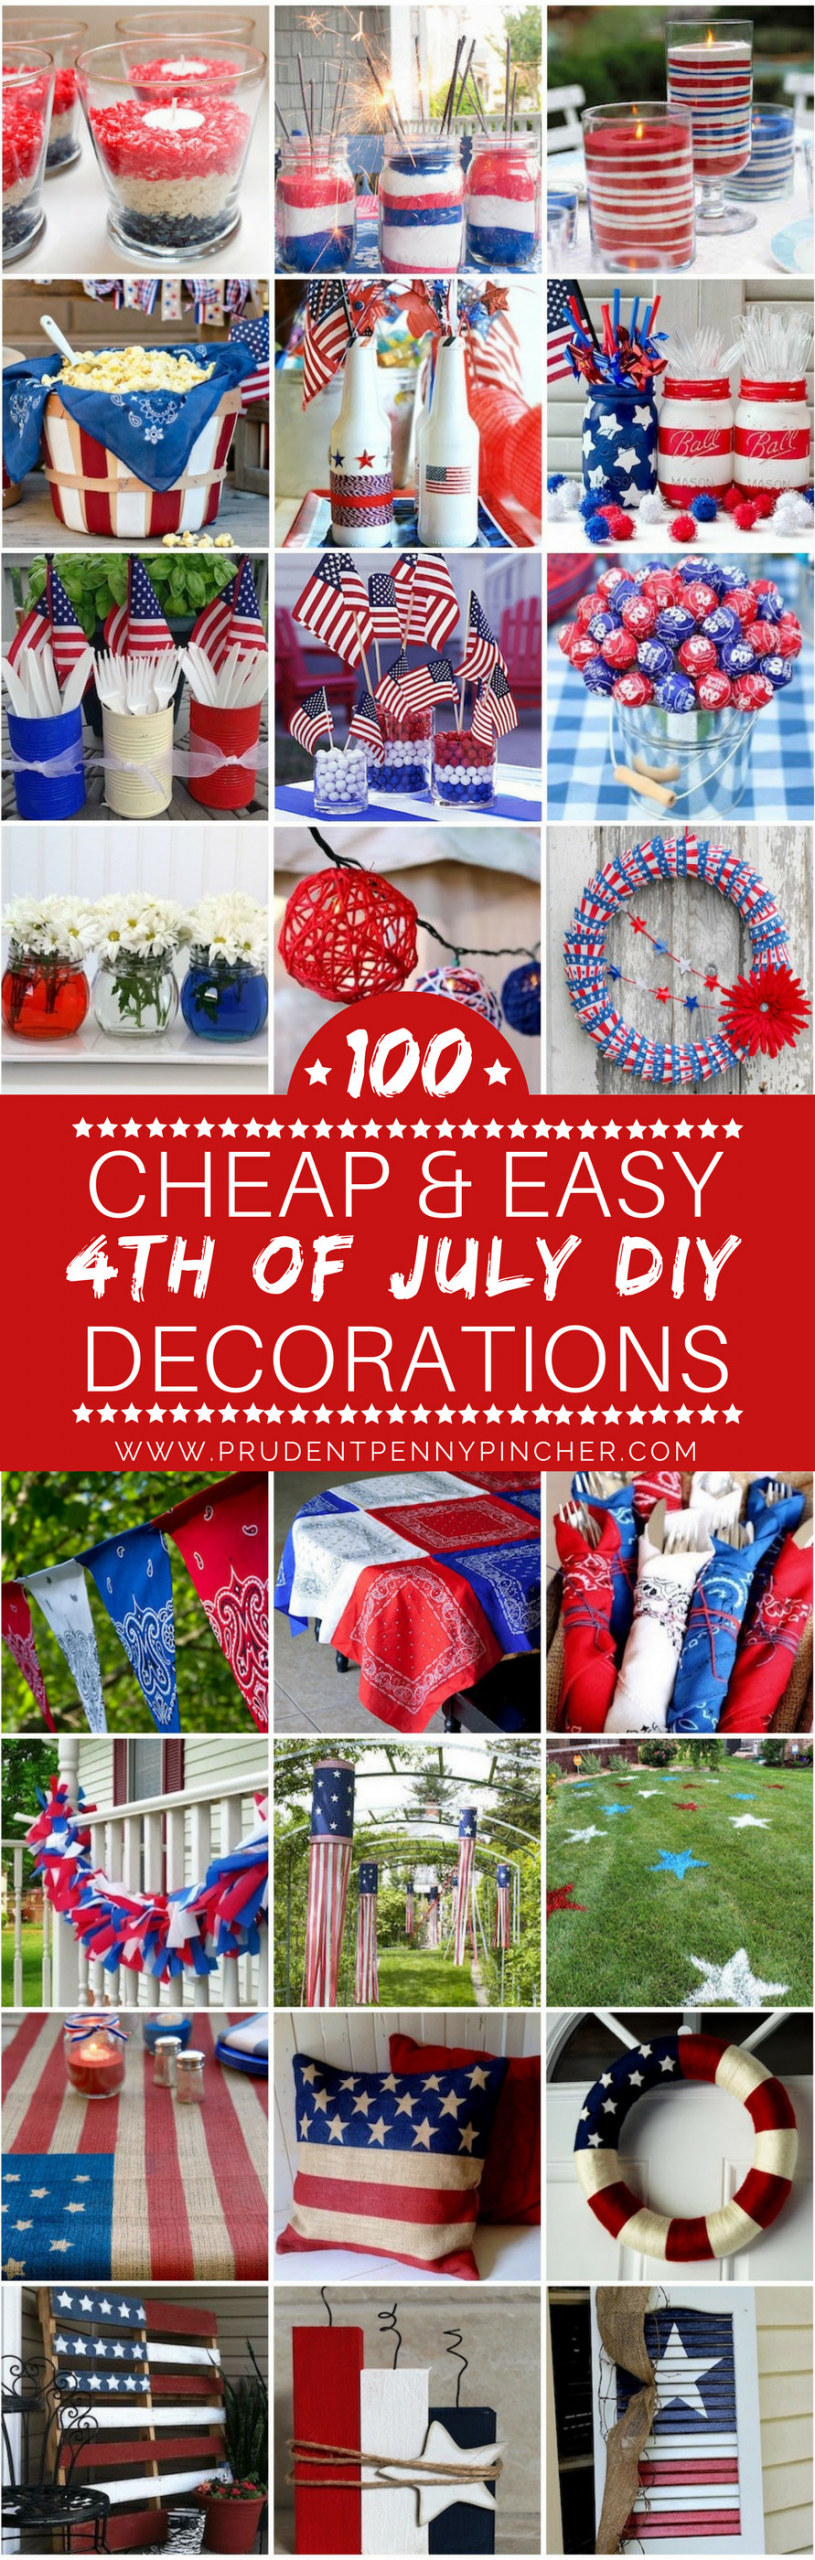 Fourth Of July Ideas
 100 Cheap and Easy 4th of July DIY Party Decor Ideas